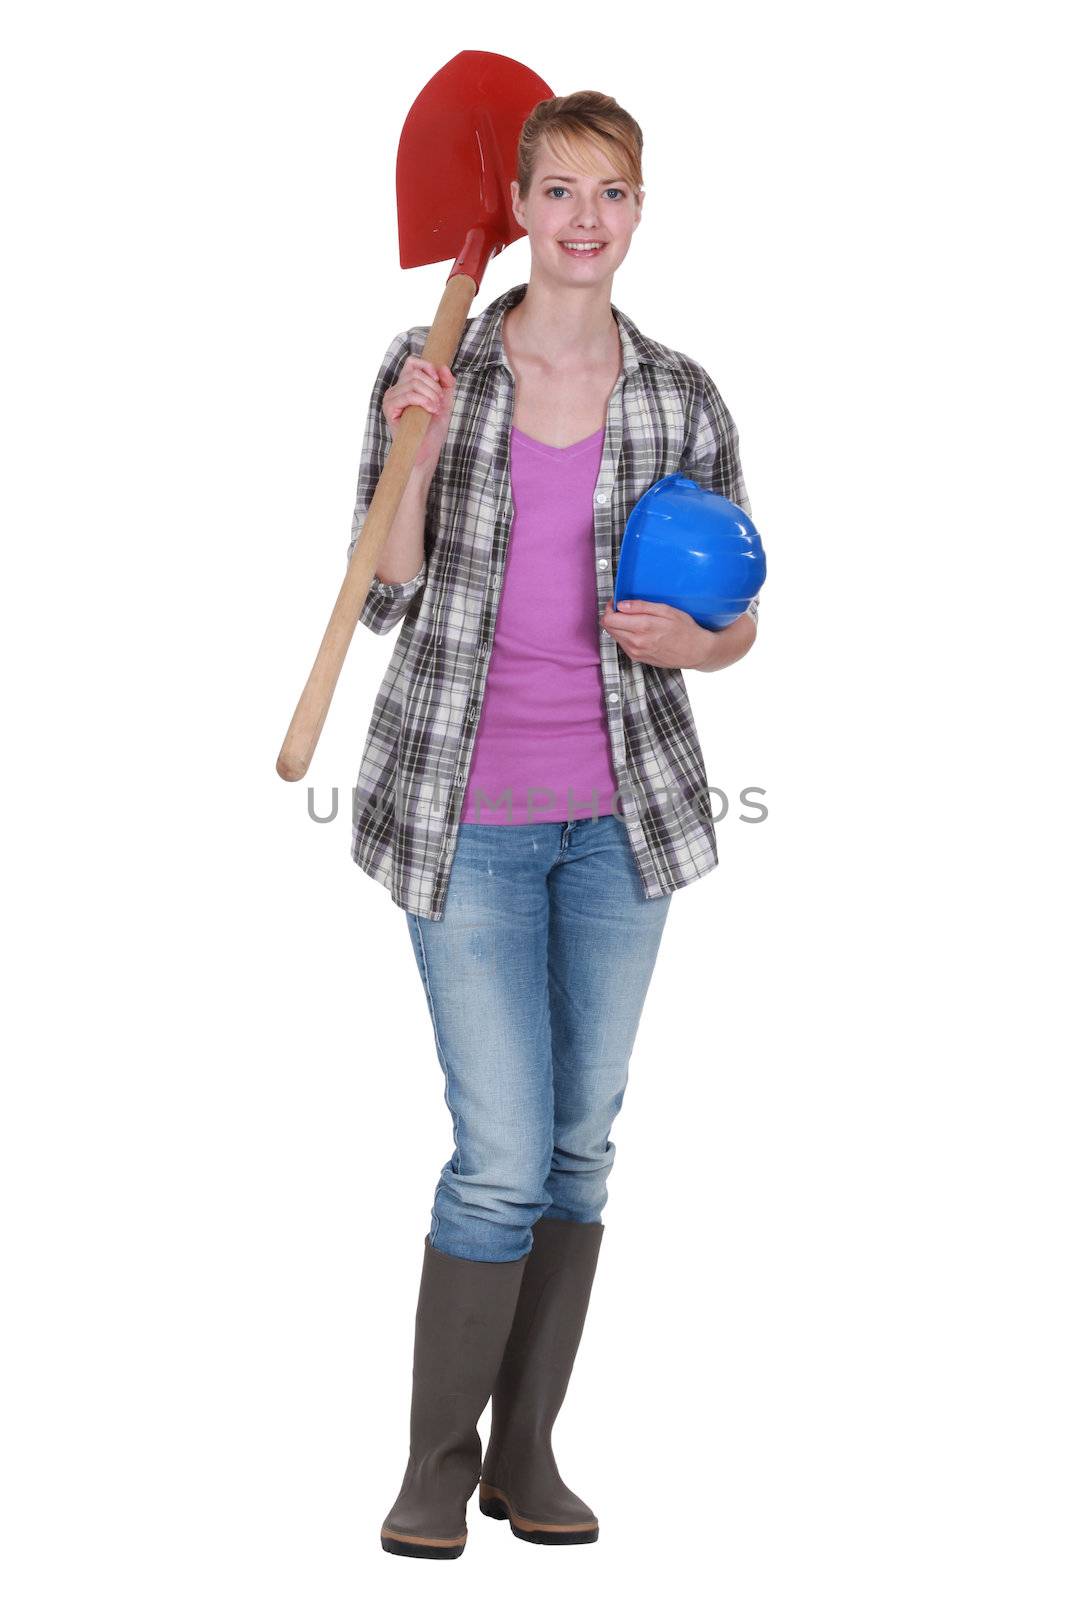 A female construction worker holding a shovel.